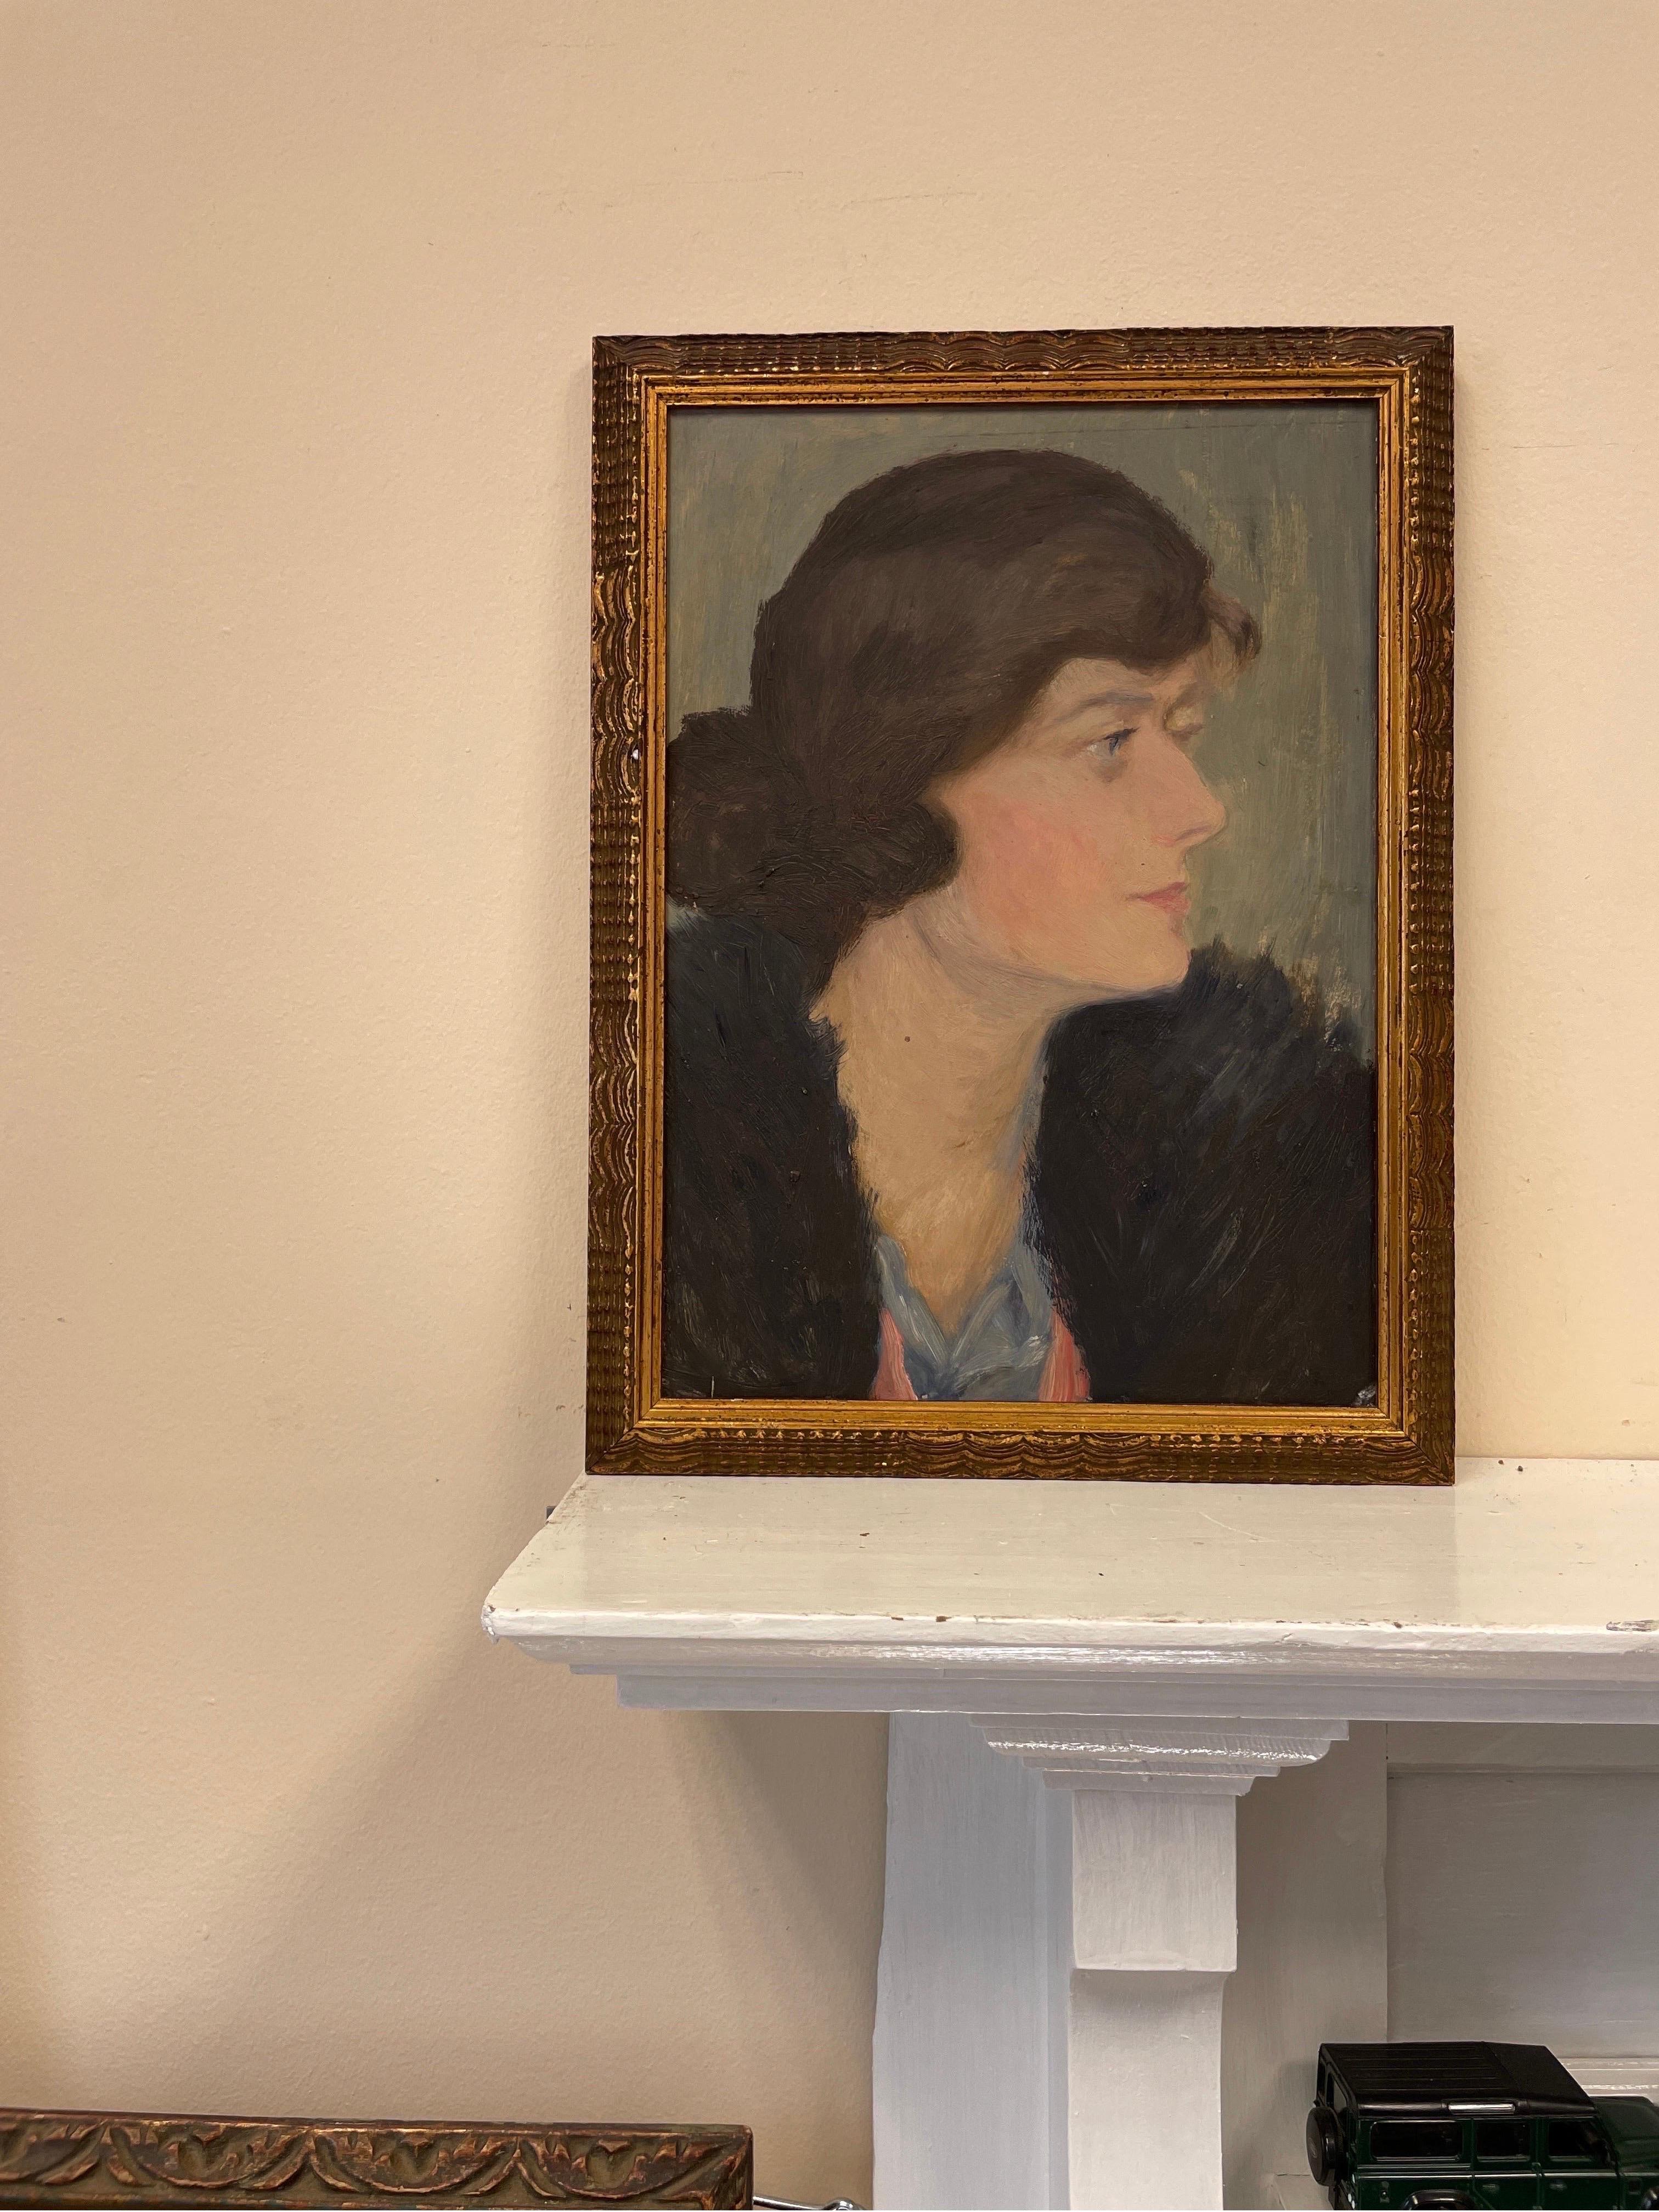 Profile Portrait of a 1930's Period English Lady, beautiful oil painting & frame - Painting by 1930's English